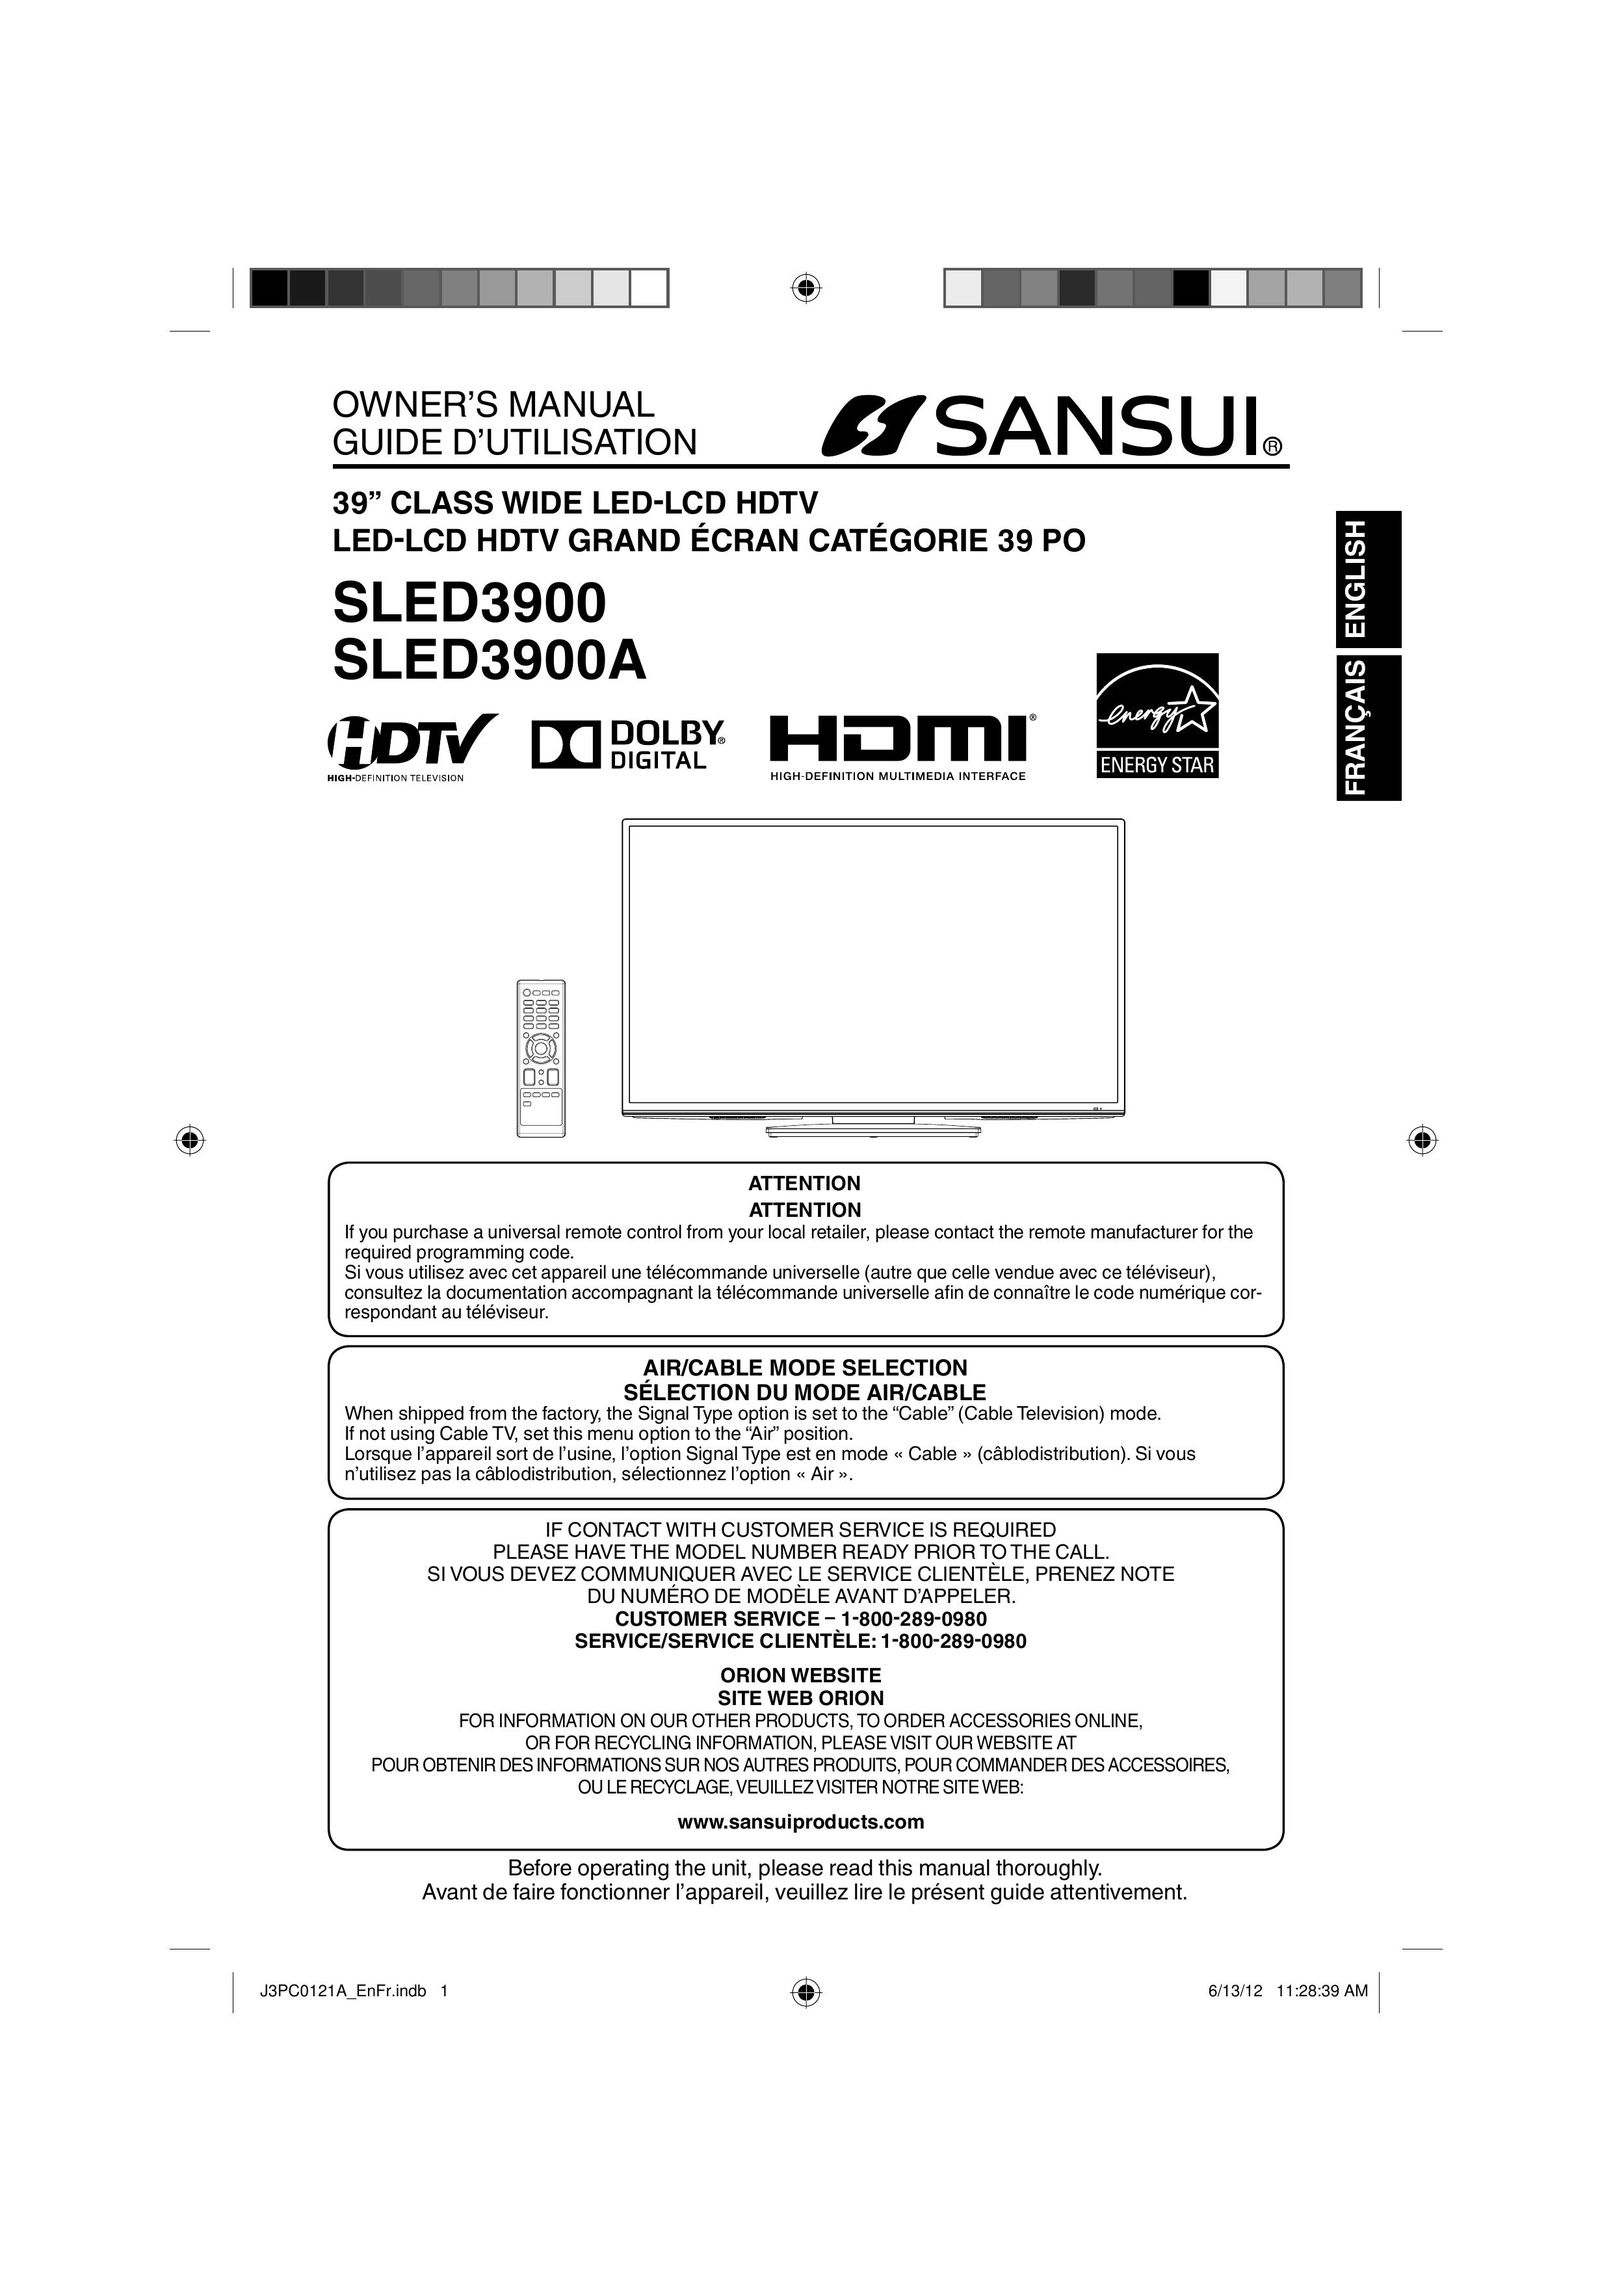 Sansui SLED3900A Flat Panel Television User Manual